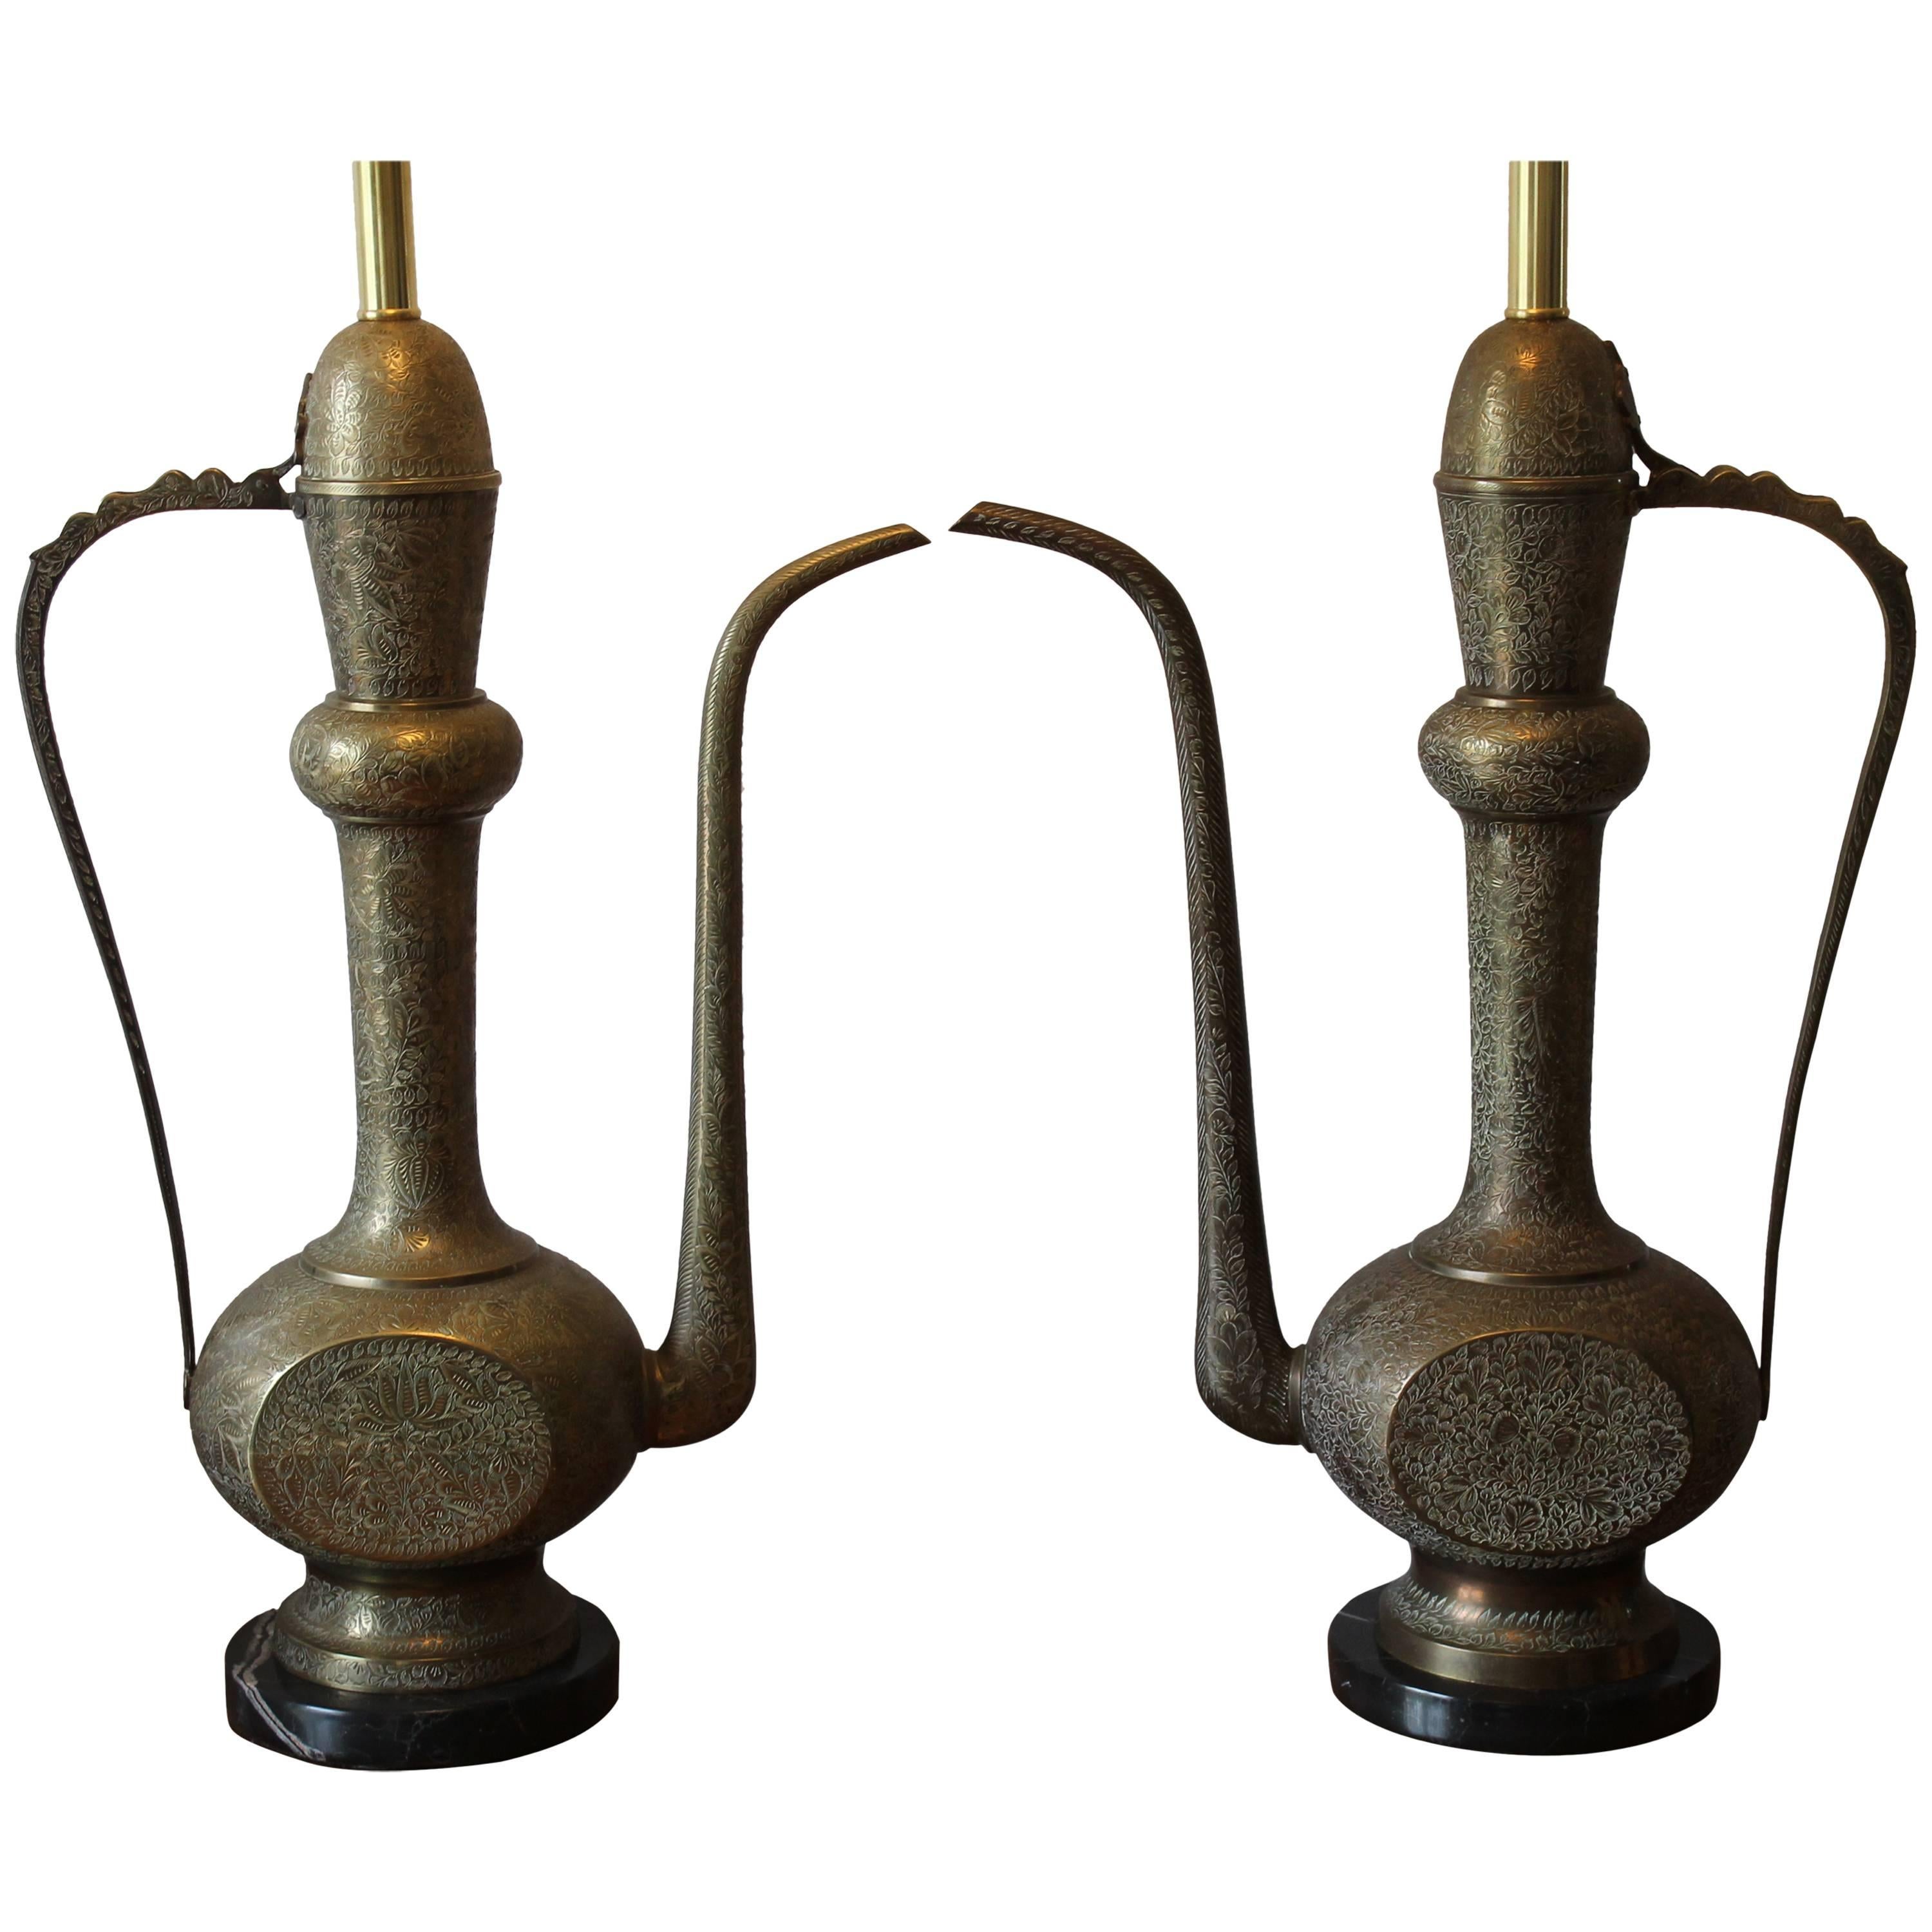 Pair of Engraved Brass Ewer Lamps